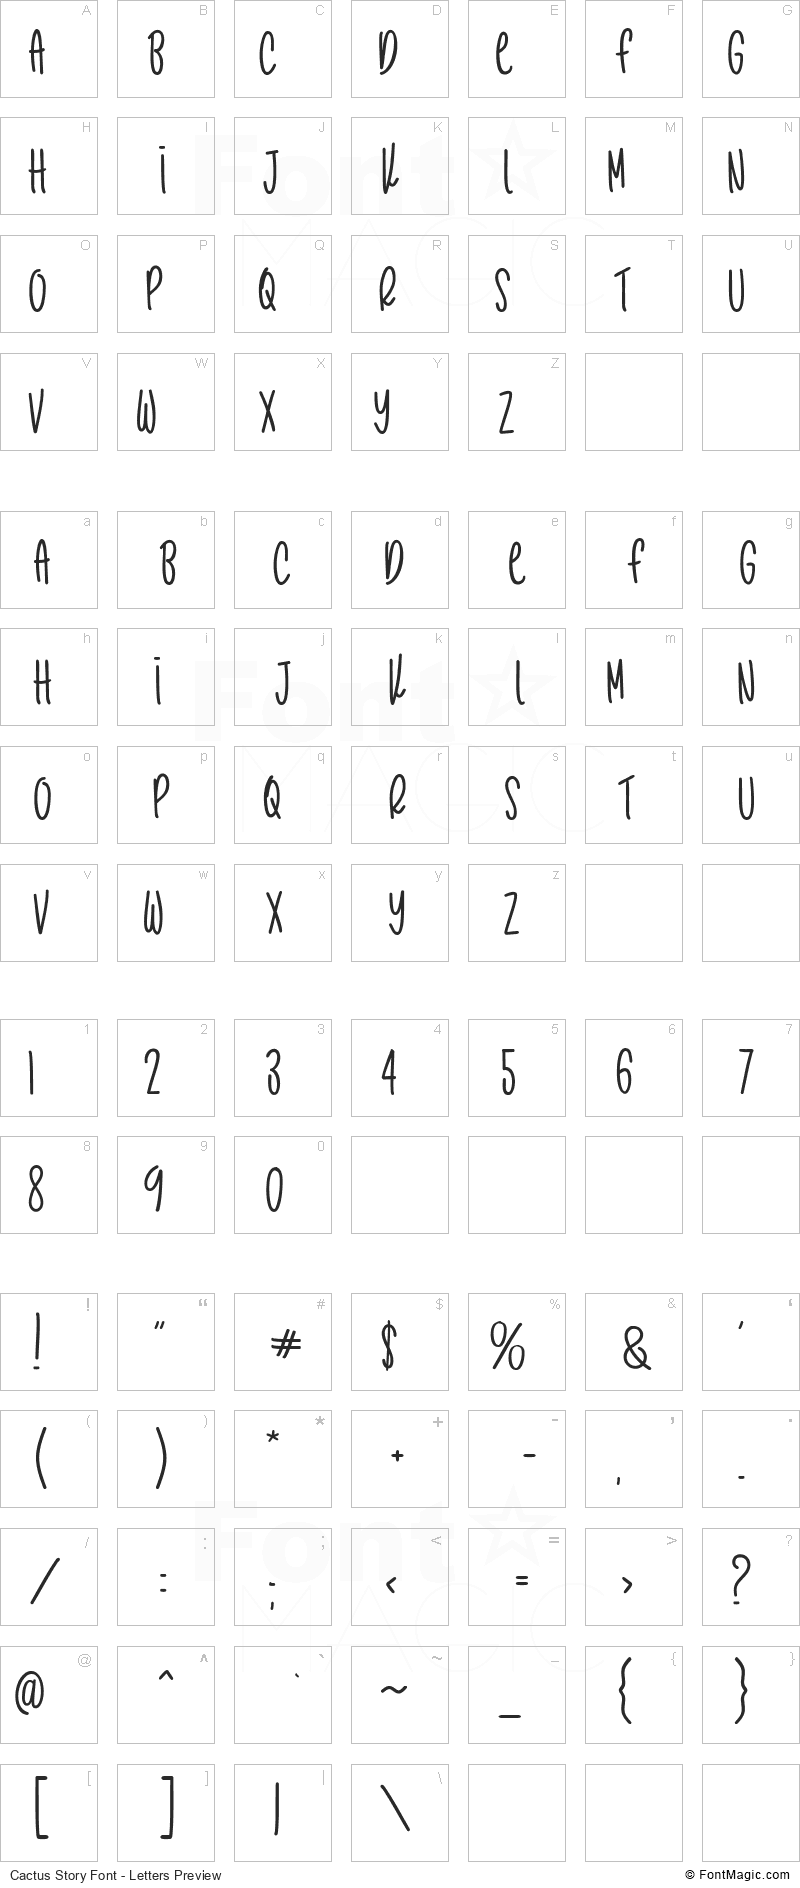 Cactus Story Font - All Latters Preview Chart